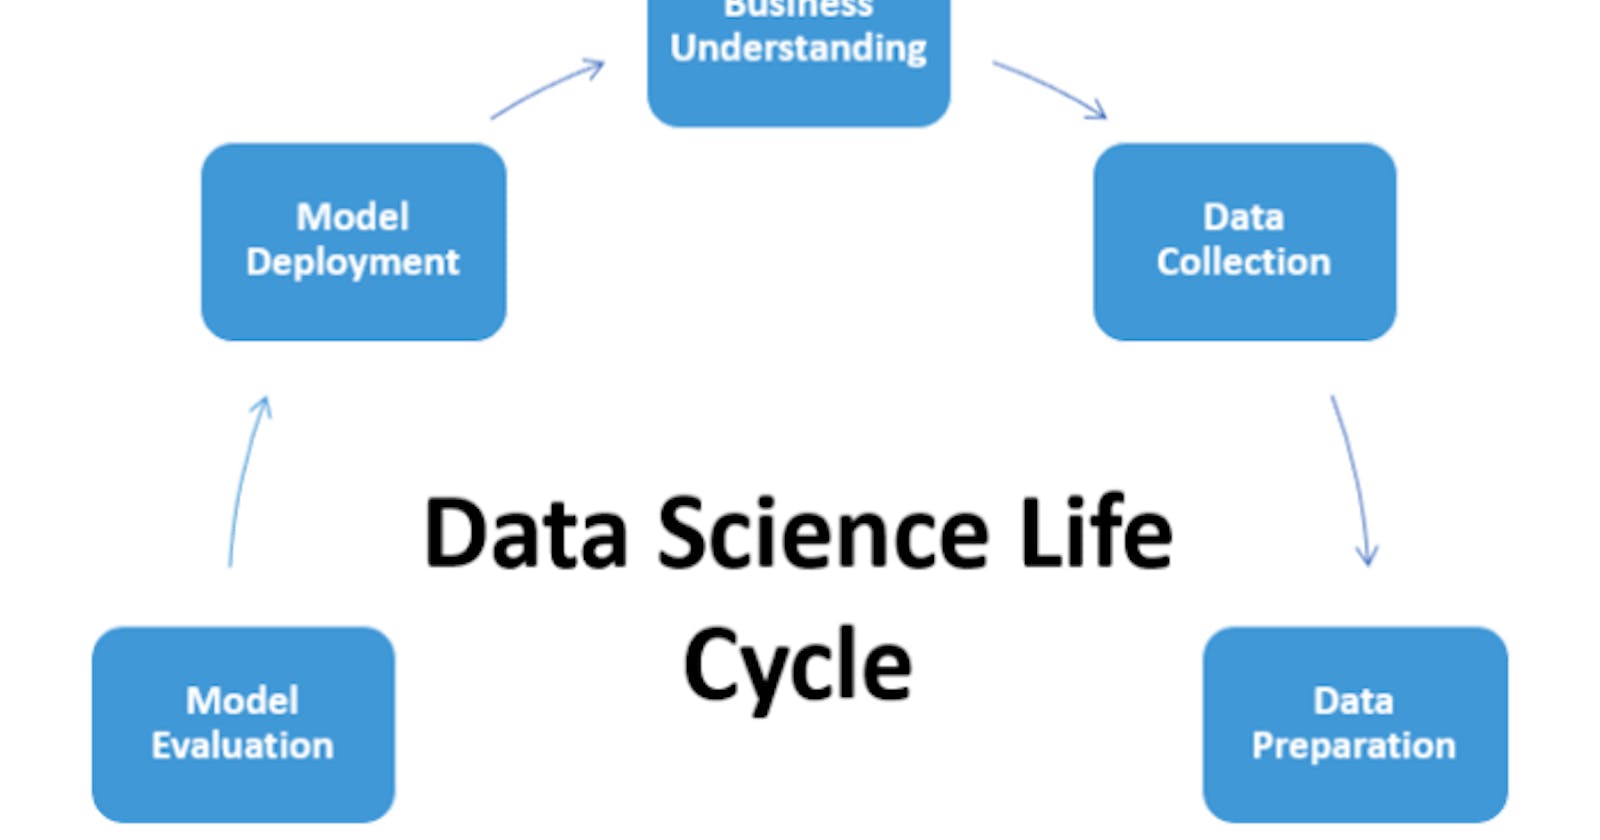 Complete Life Cycle of a Data Science/Machine Learning Project